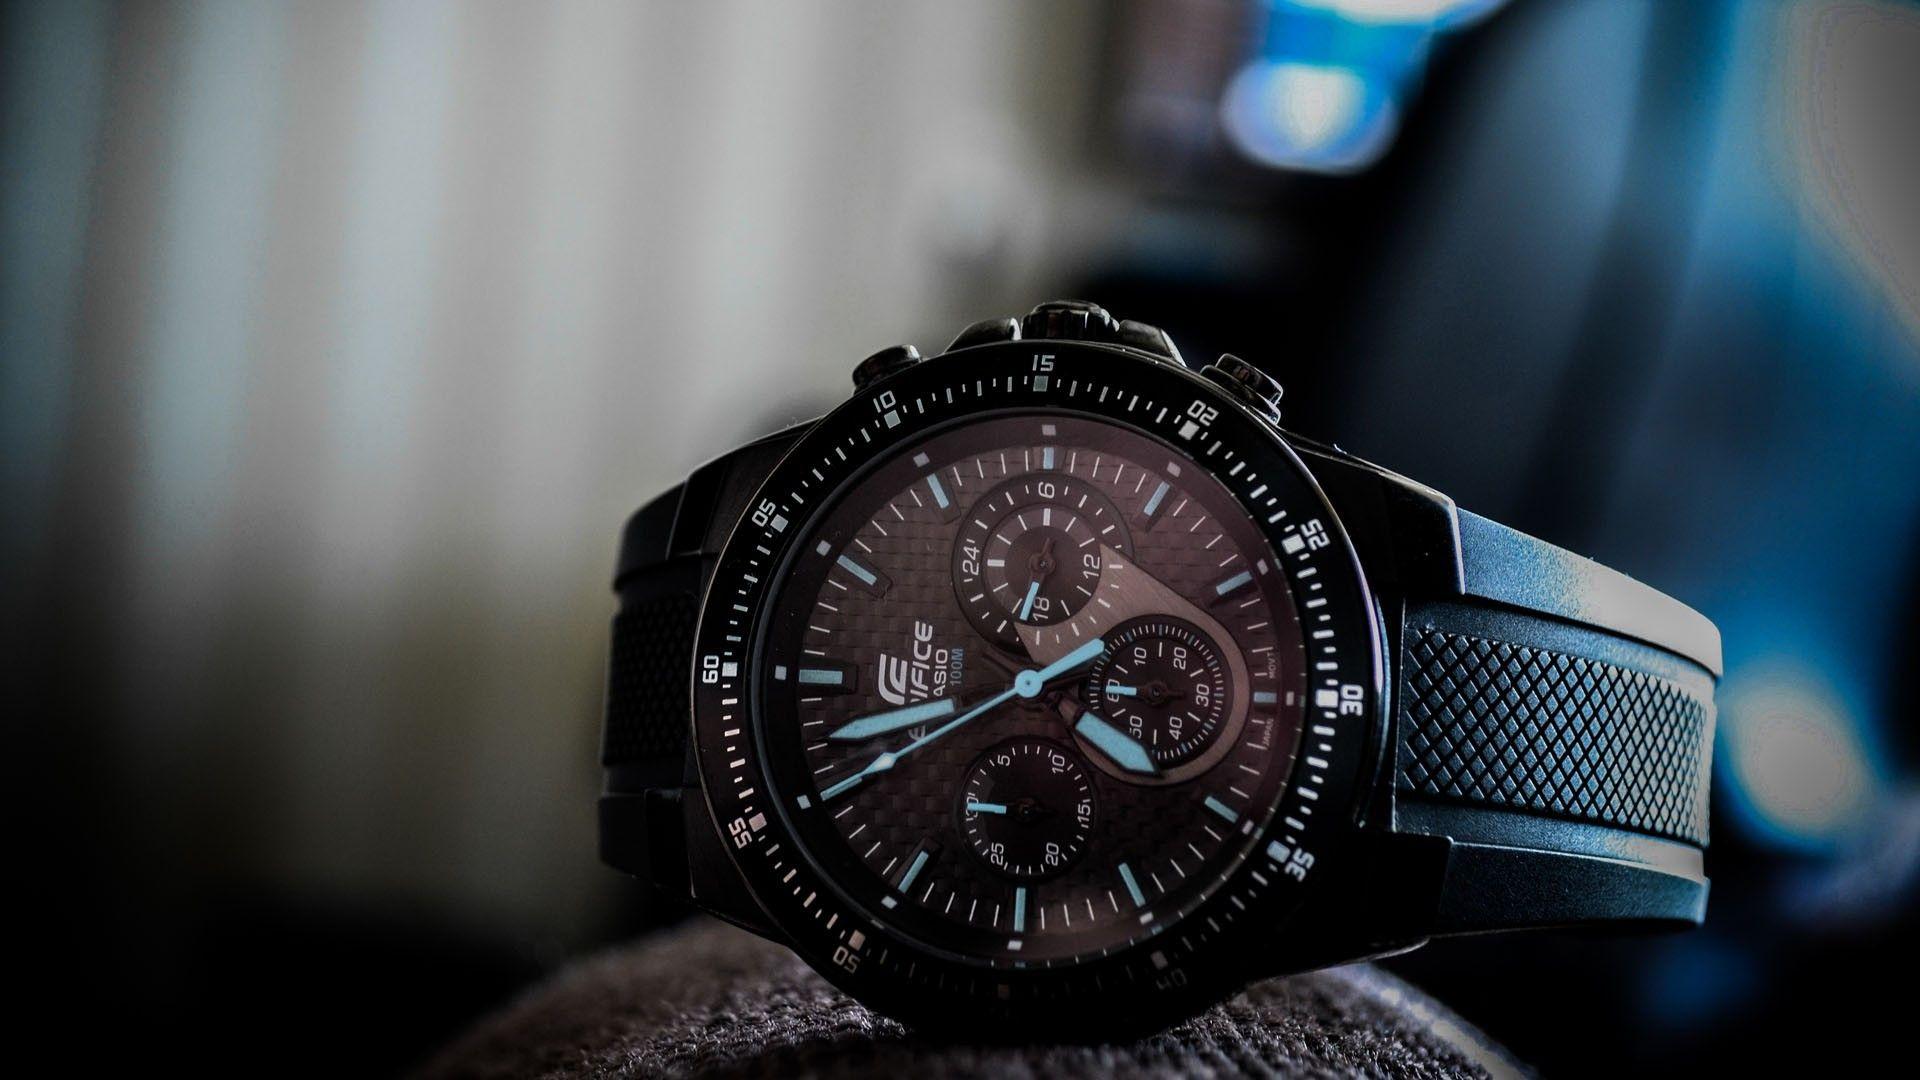 Watch company Casio wallpaper and image, picture